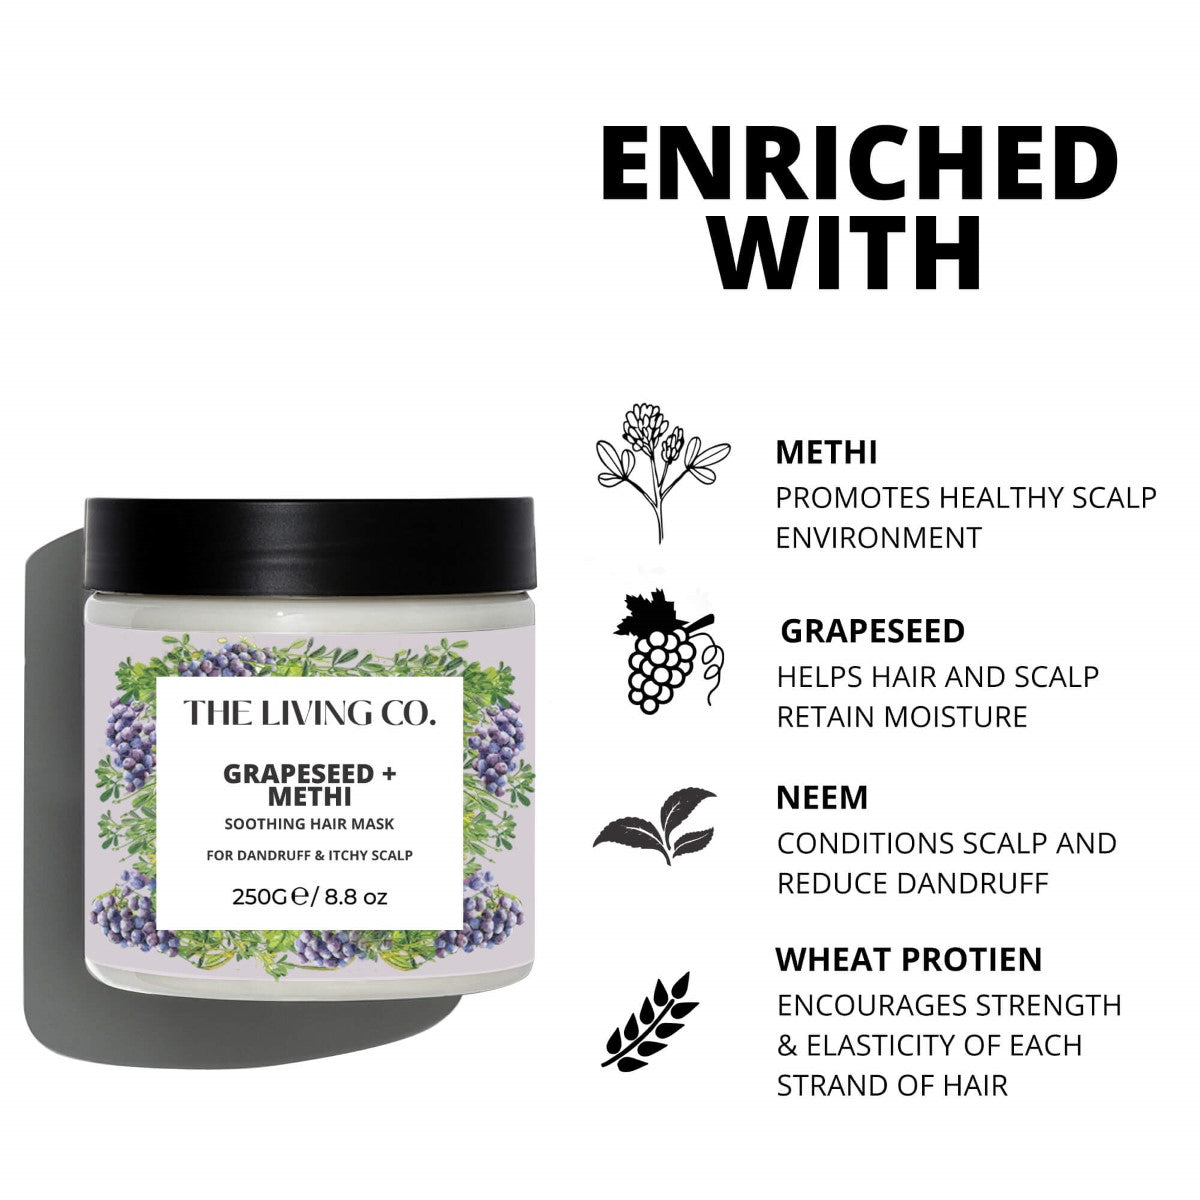 Soothing Hair Mask With Grapeseed + Methi